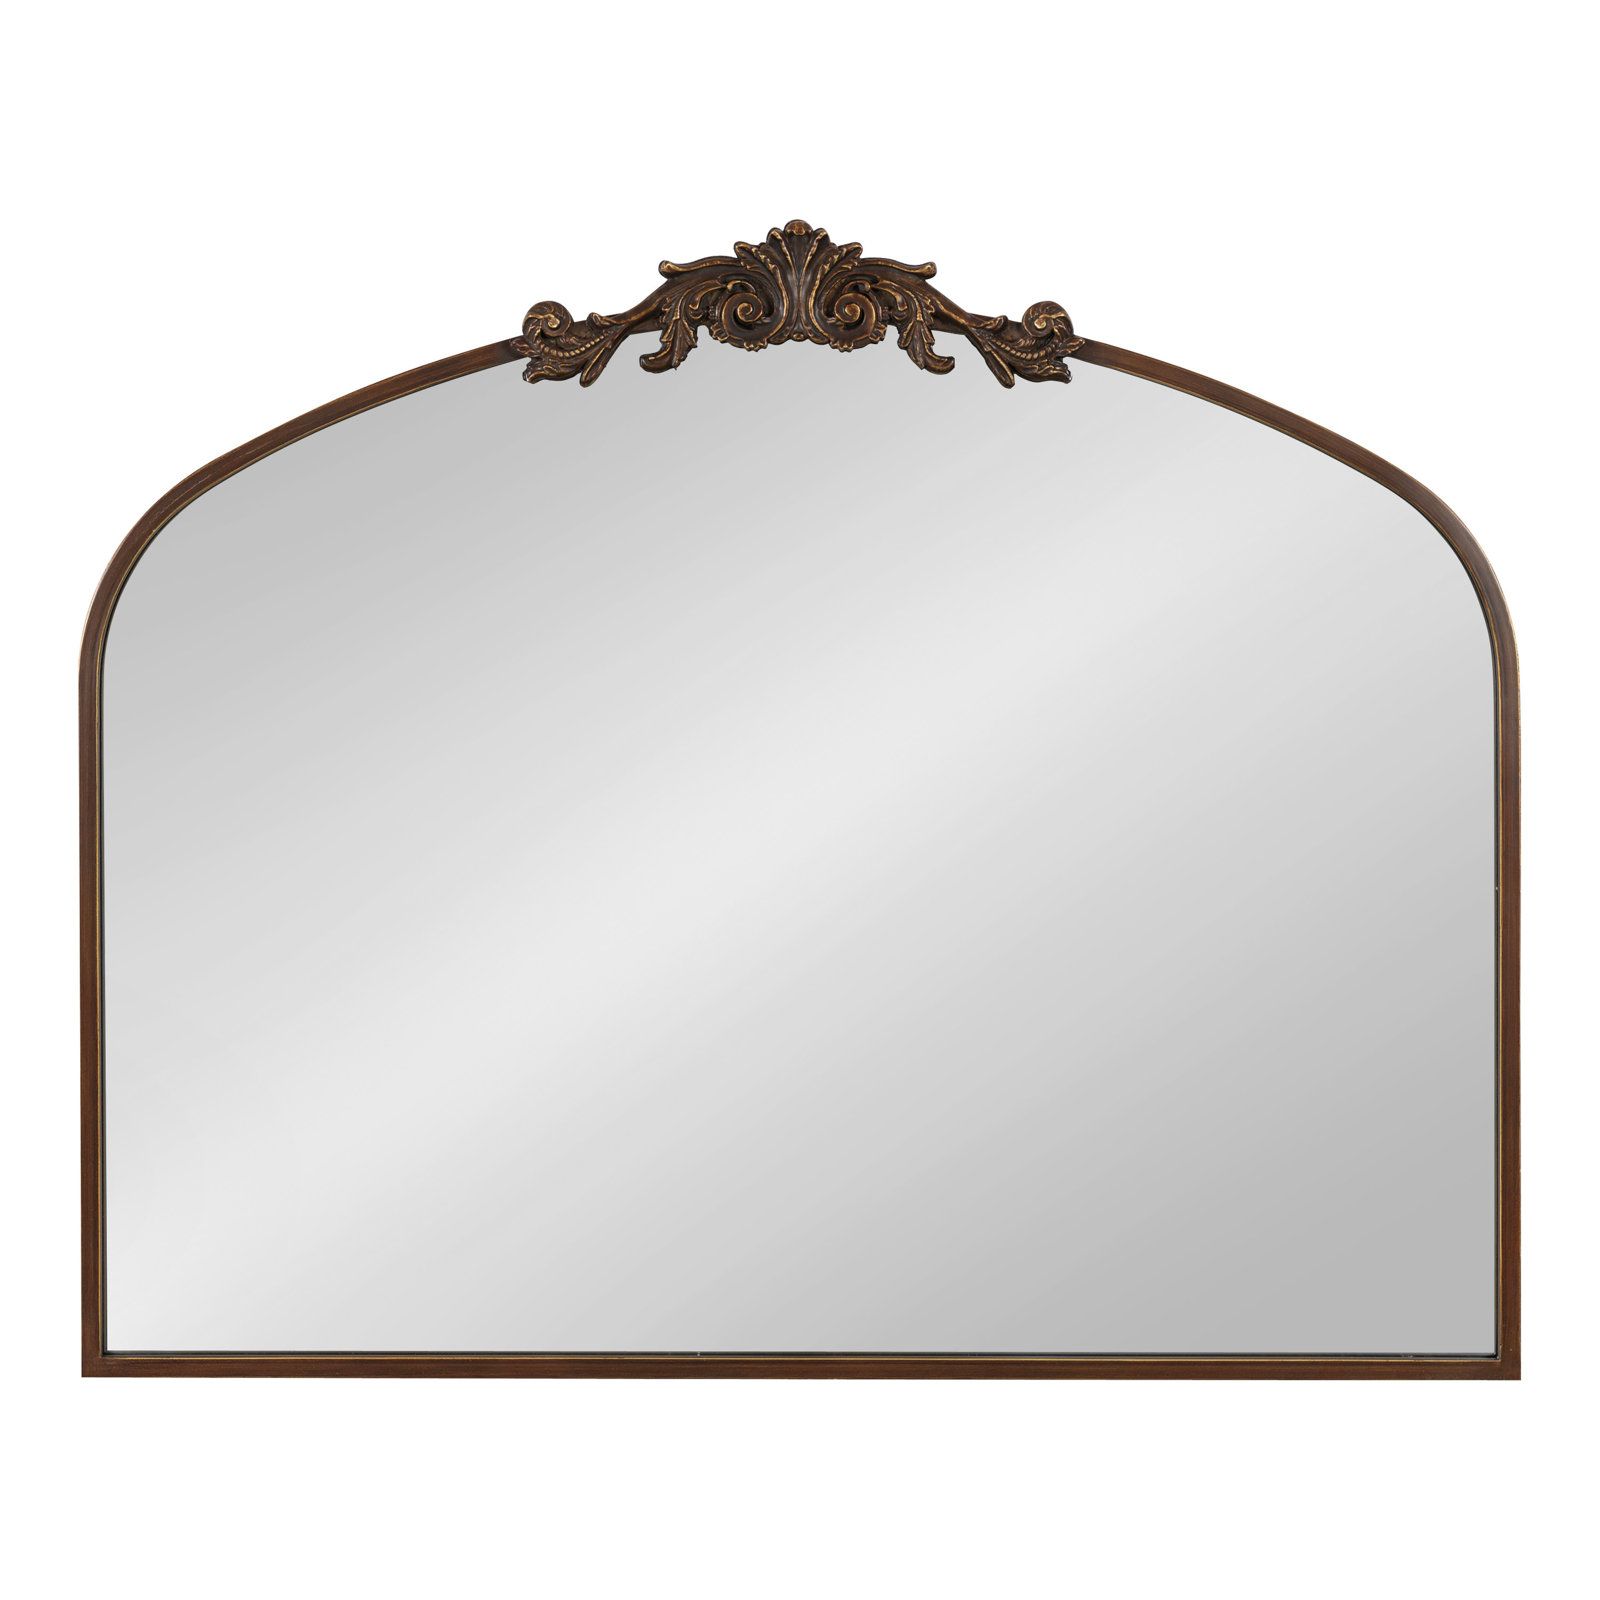 36" x 29" Anglo Arch Mirror - Bronze